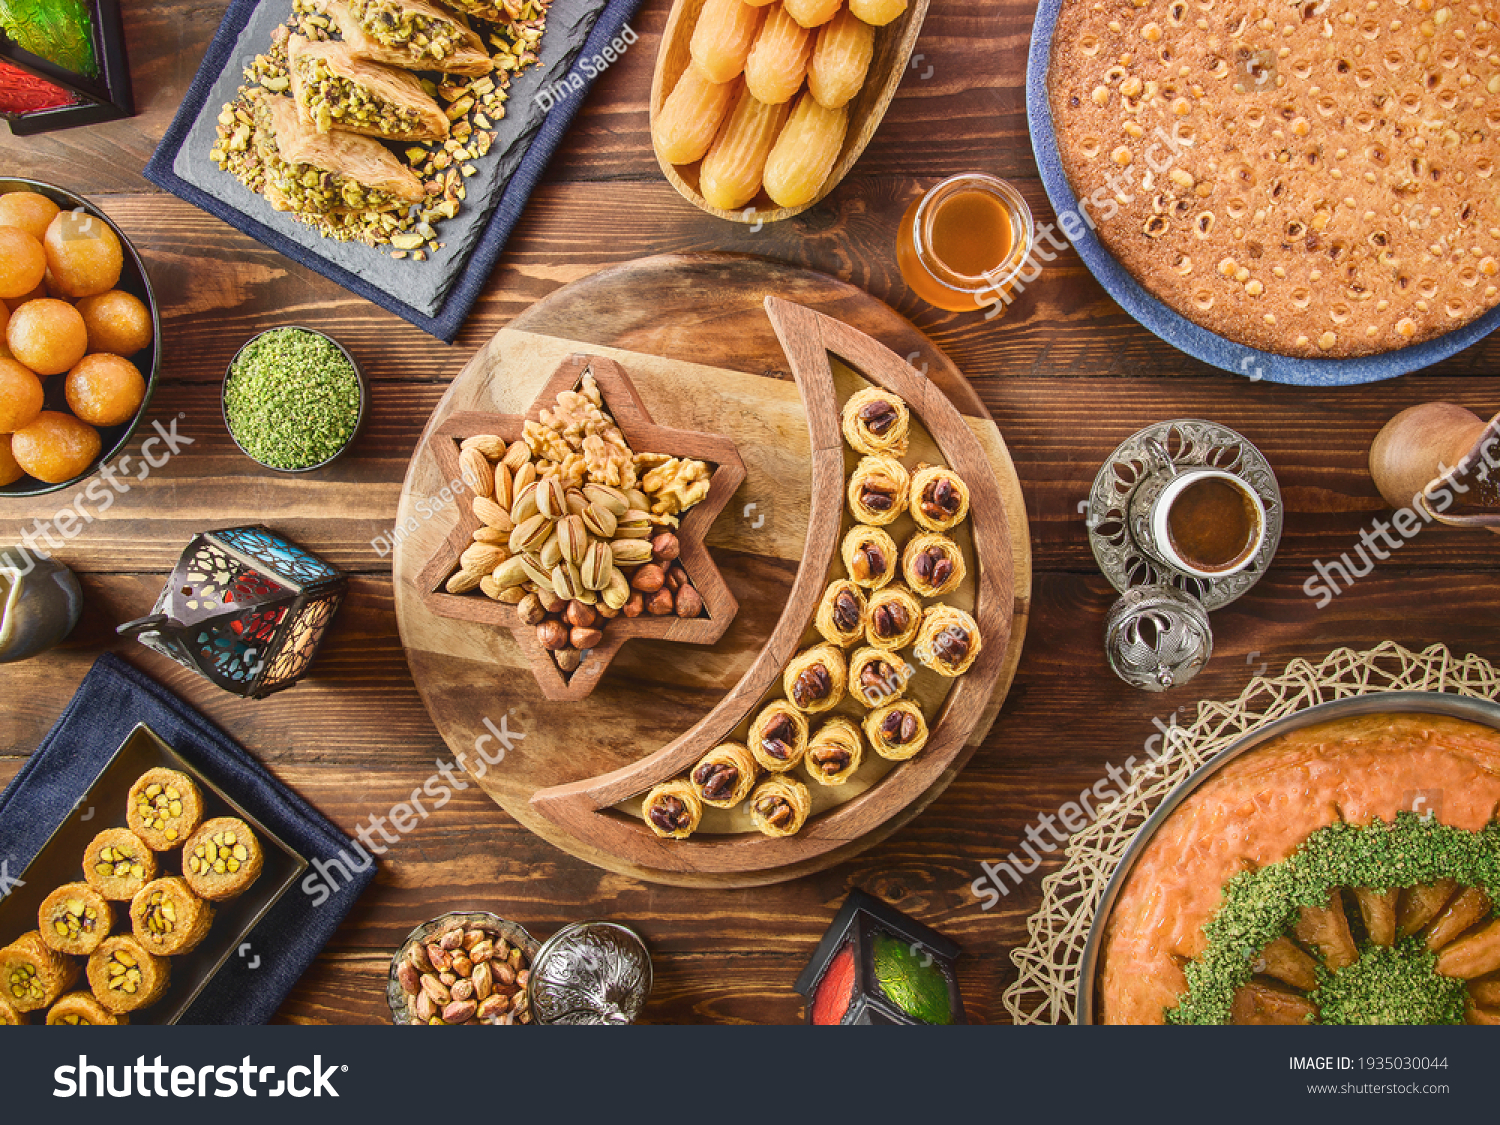 stock-photo-arabic-cuisine-middle-eastern-desserts-delicious-collection-of-ramadan-traditional-desserts-1935030044